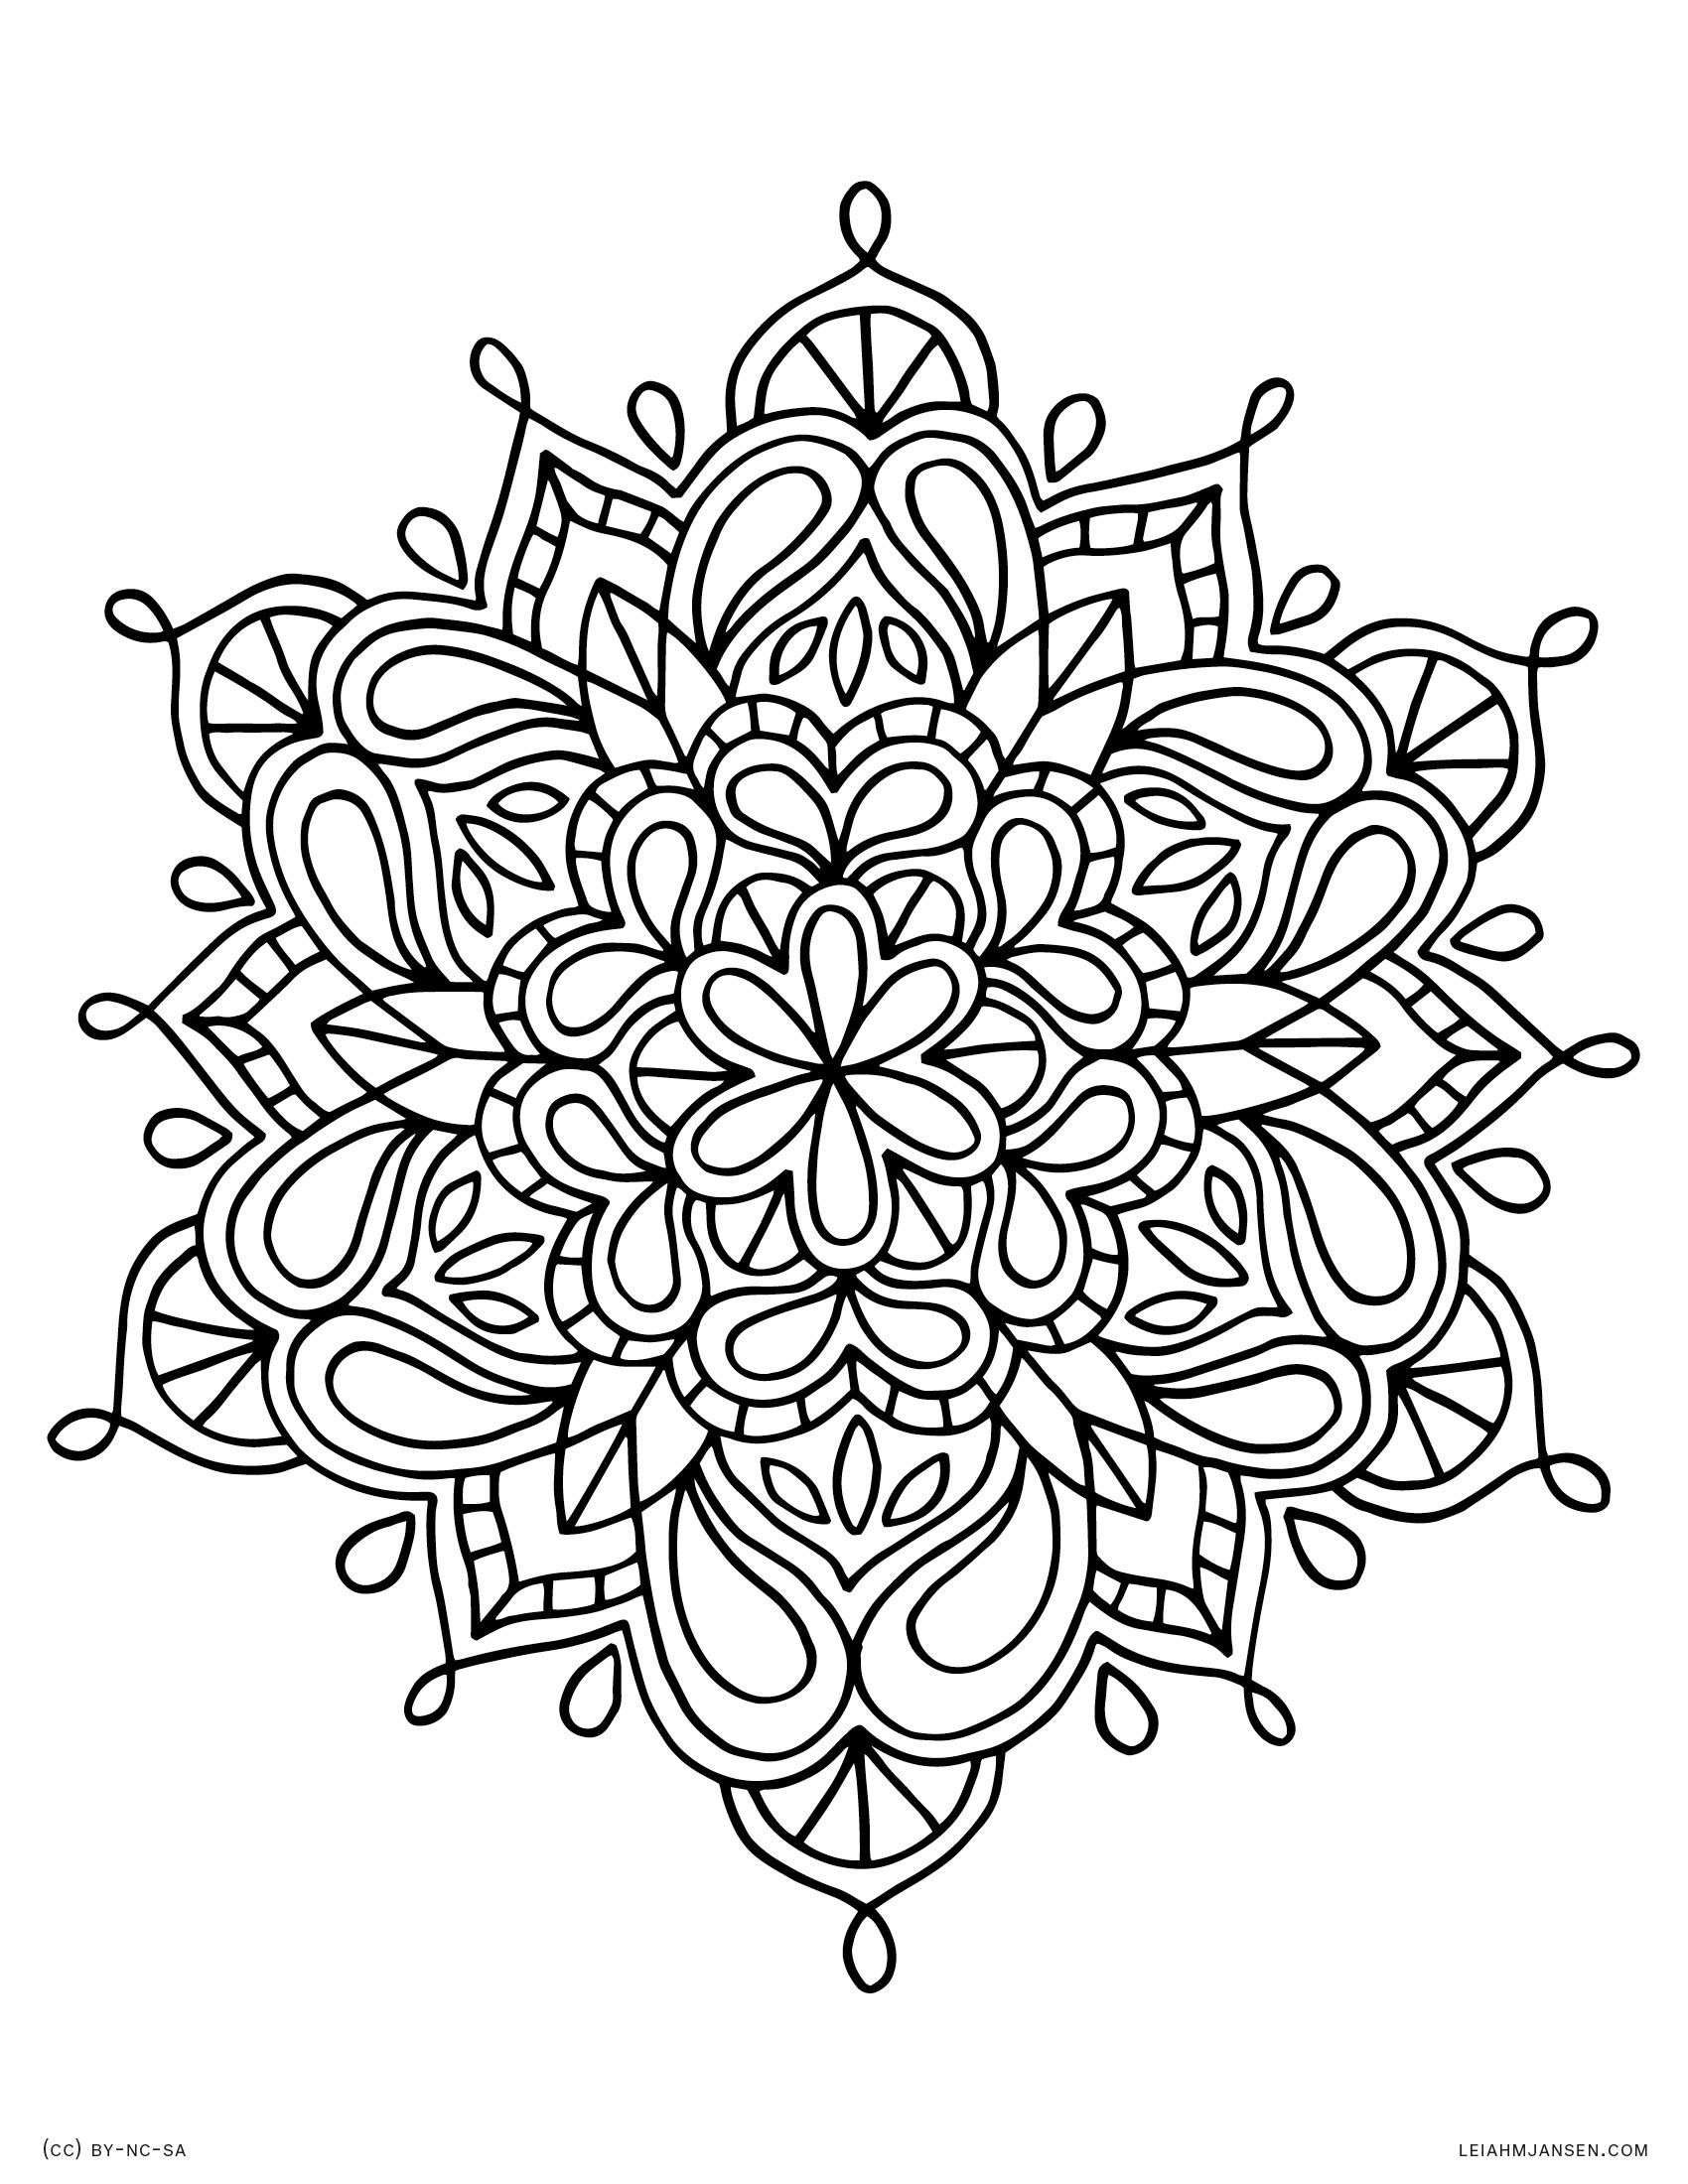 Mandala Coloring Pages Free Printable
 Coloring Pages